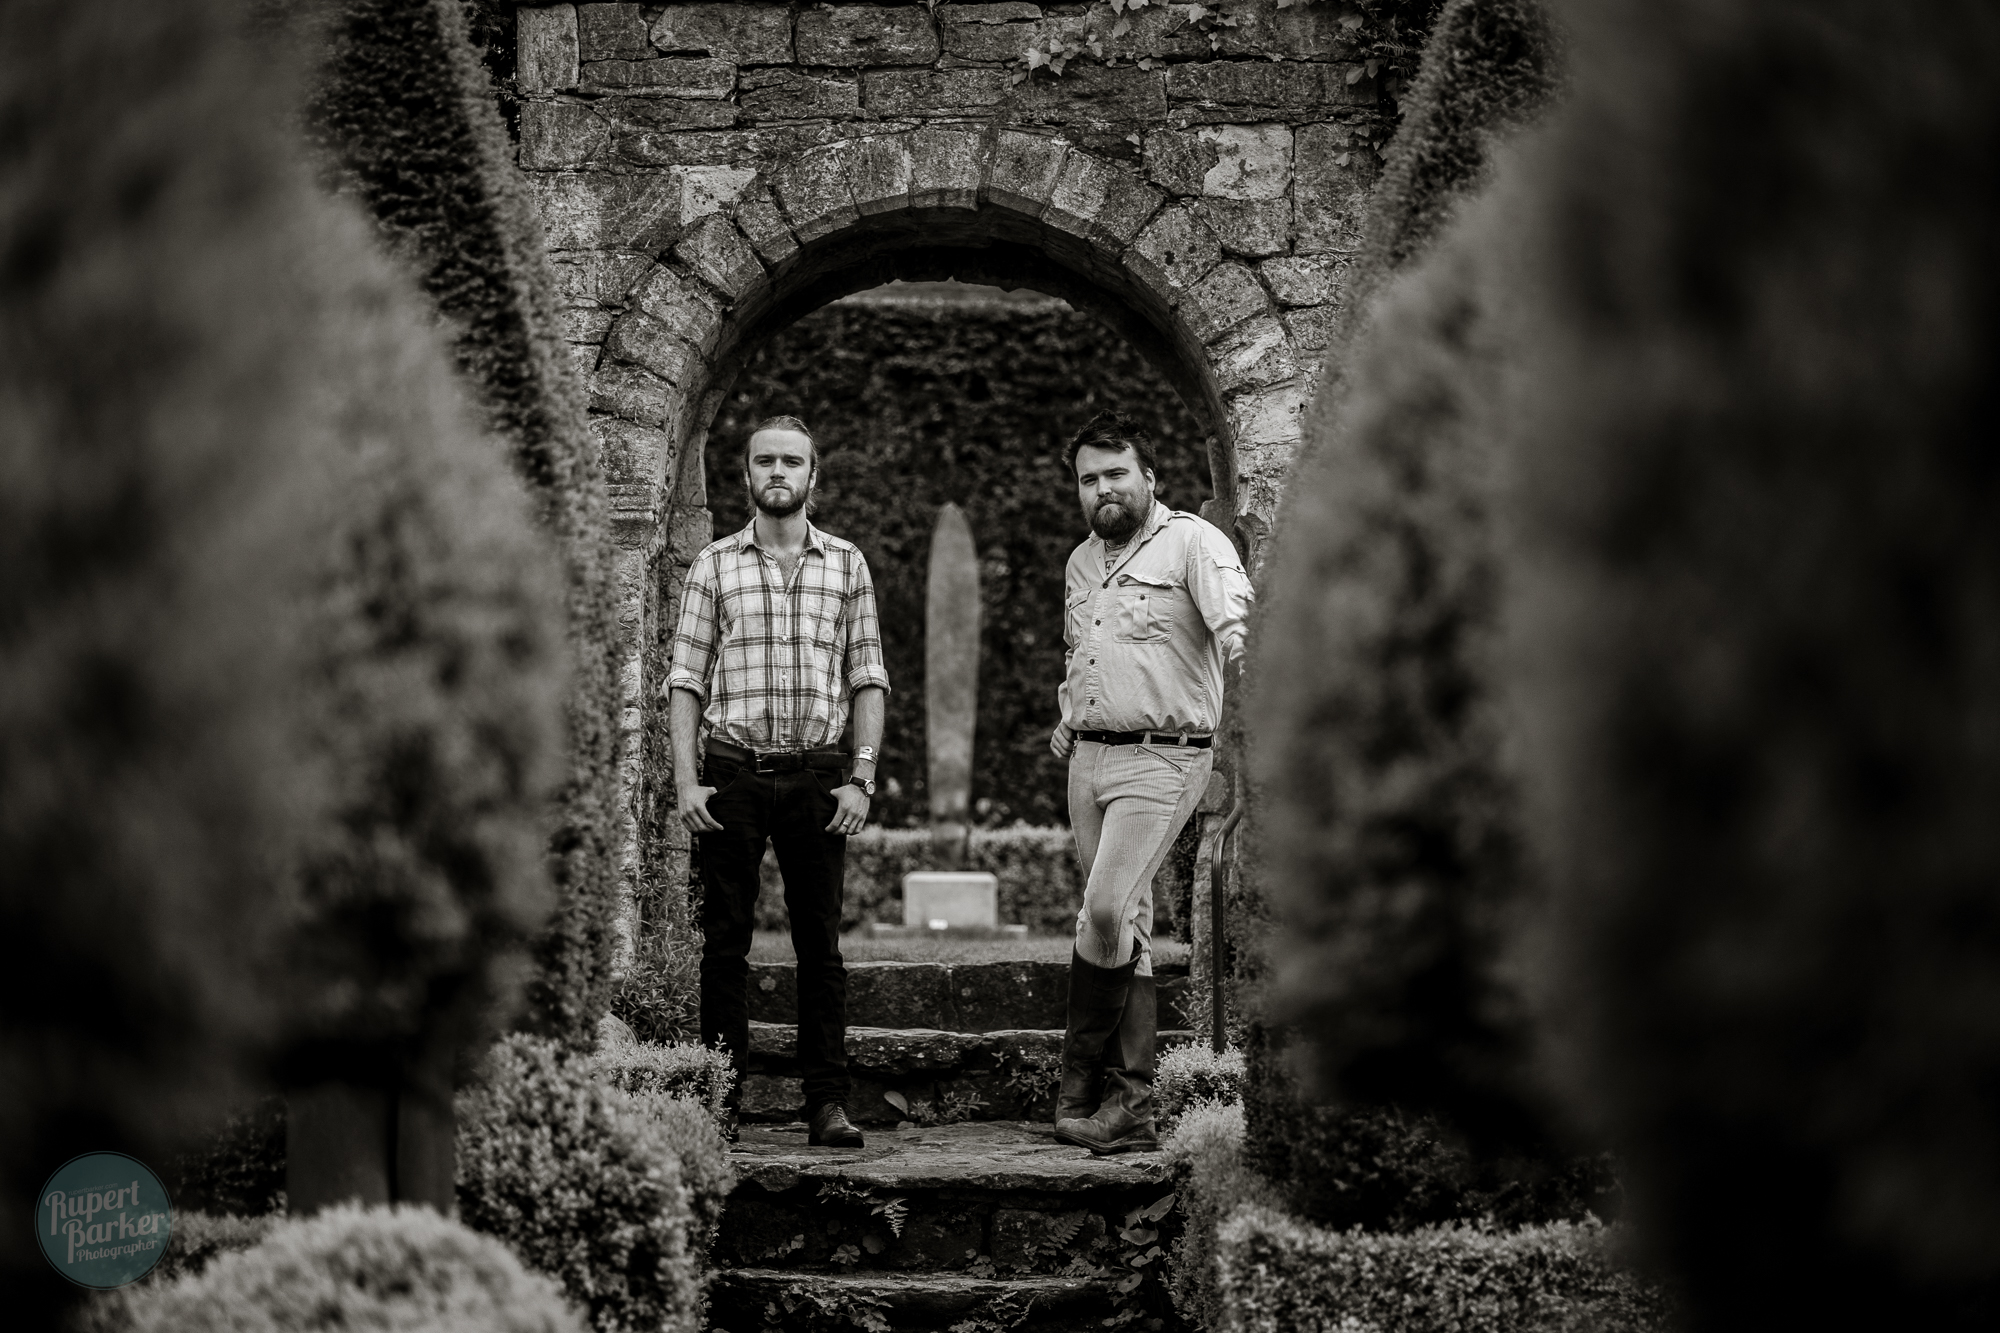 The Pollards Abbey House Gardens Portraits New Guardians of the Garden